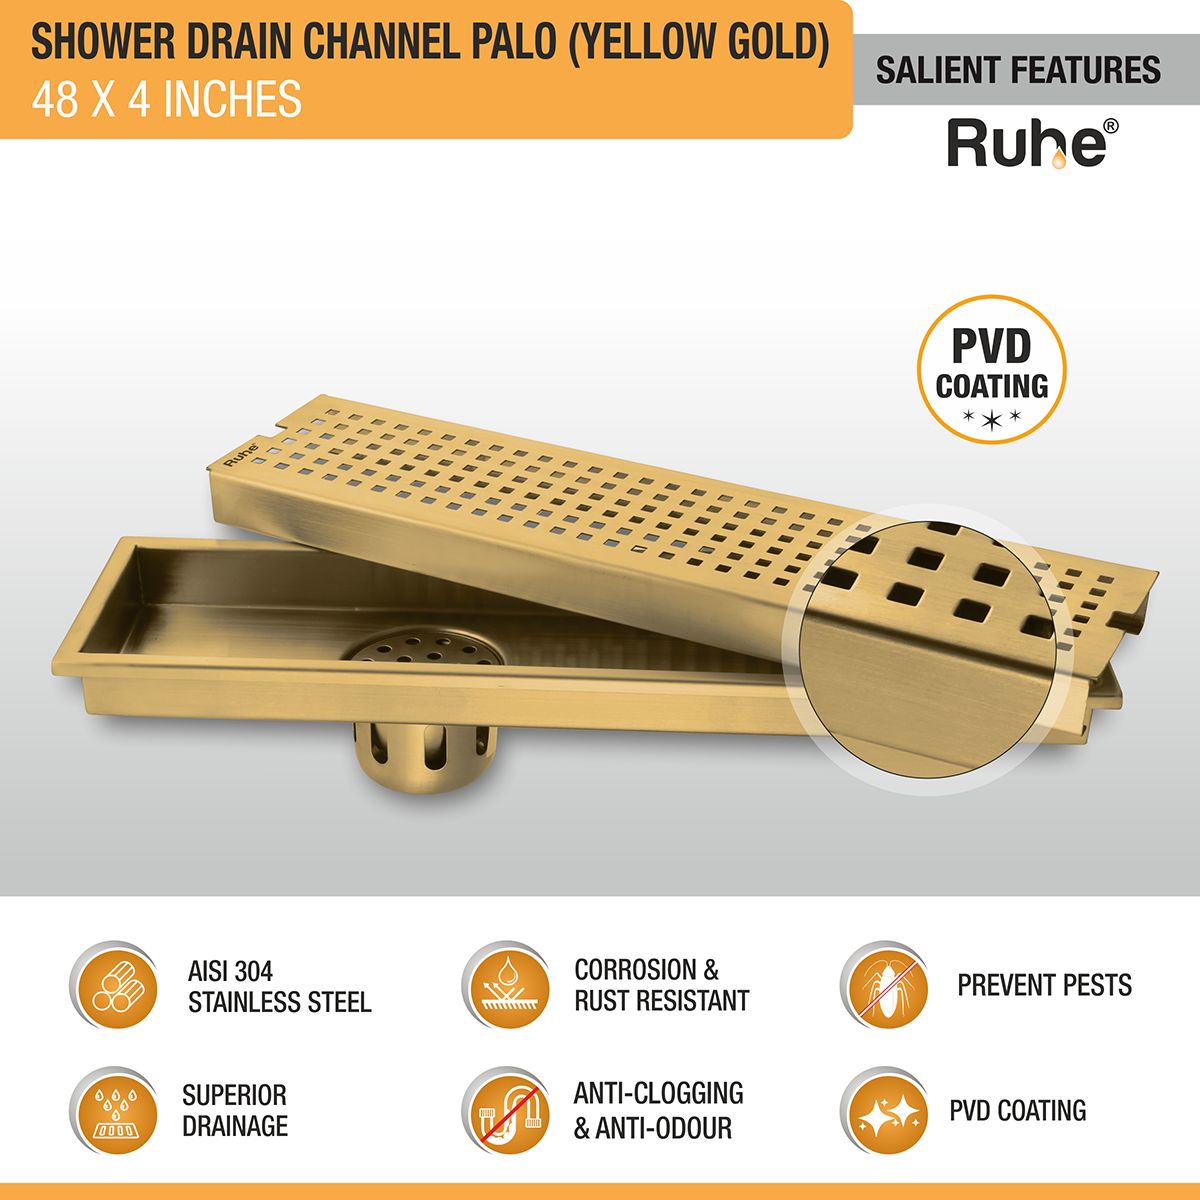 Palo Shower Drain Channel (48 x 4 Inches) YELLOW GOLD features